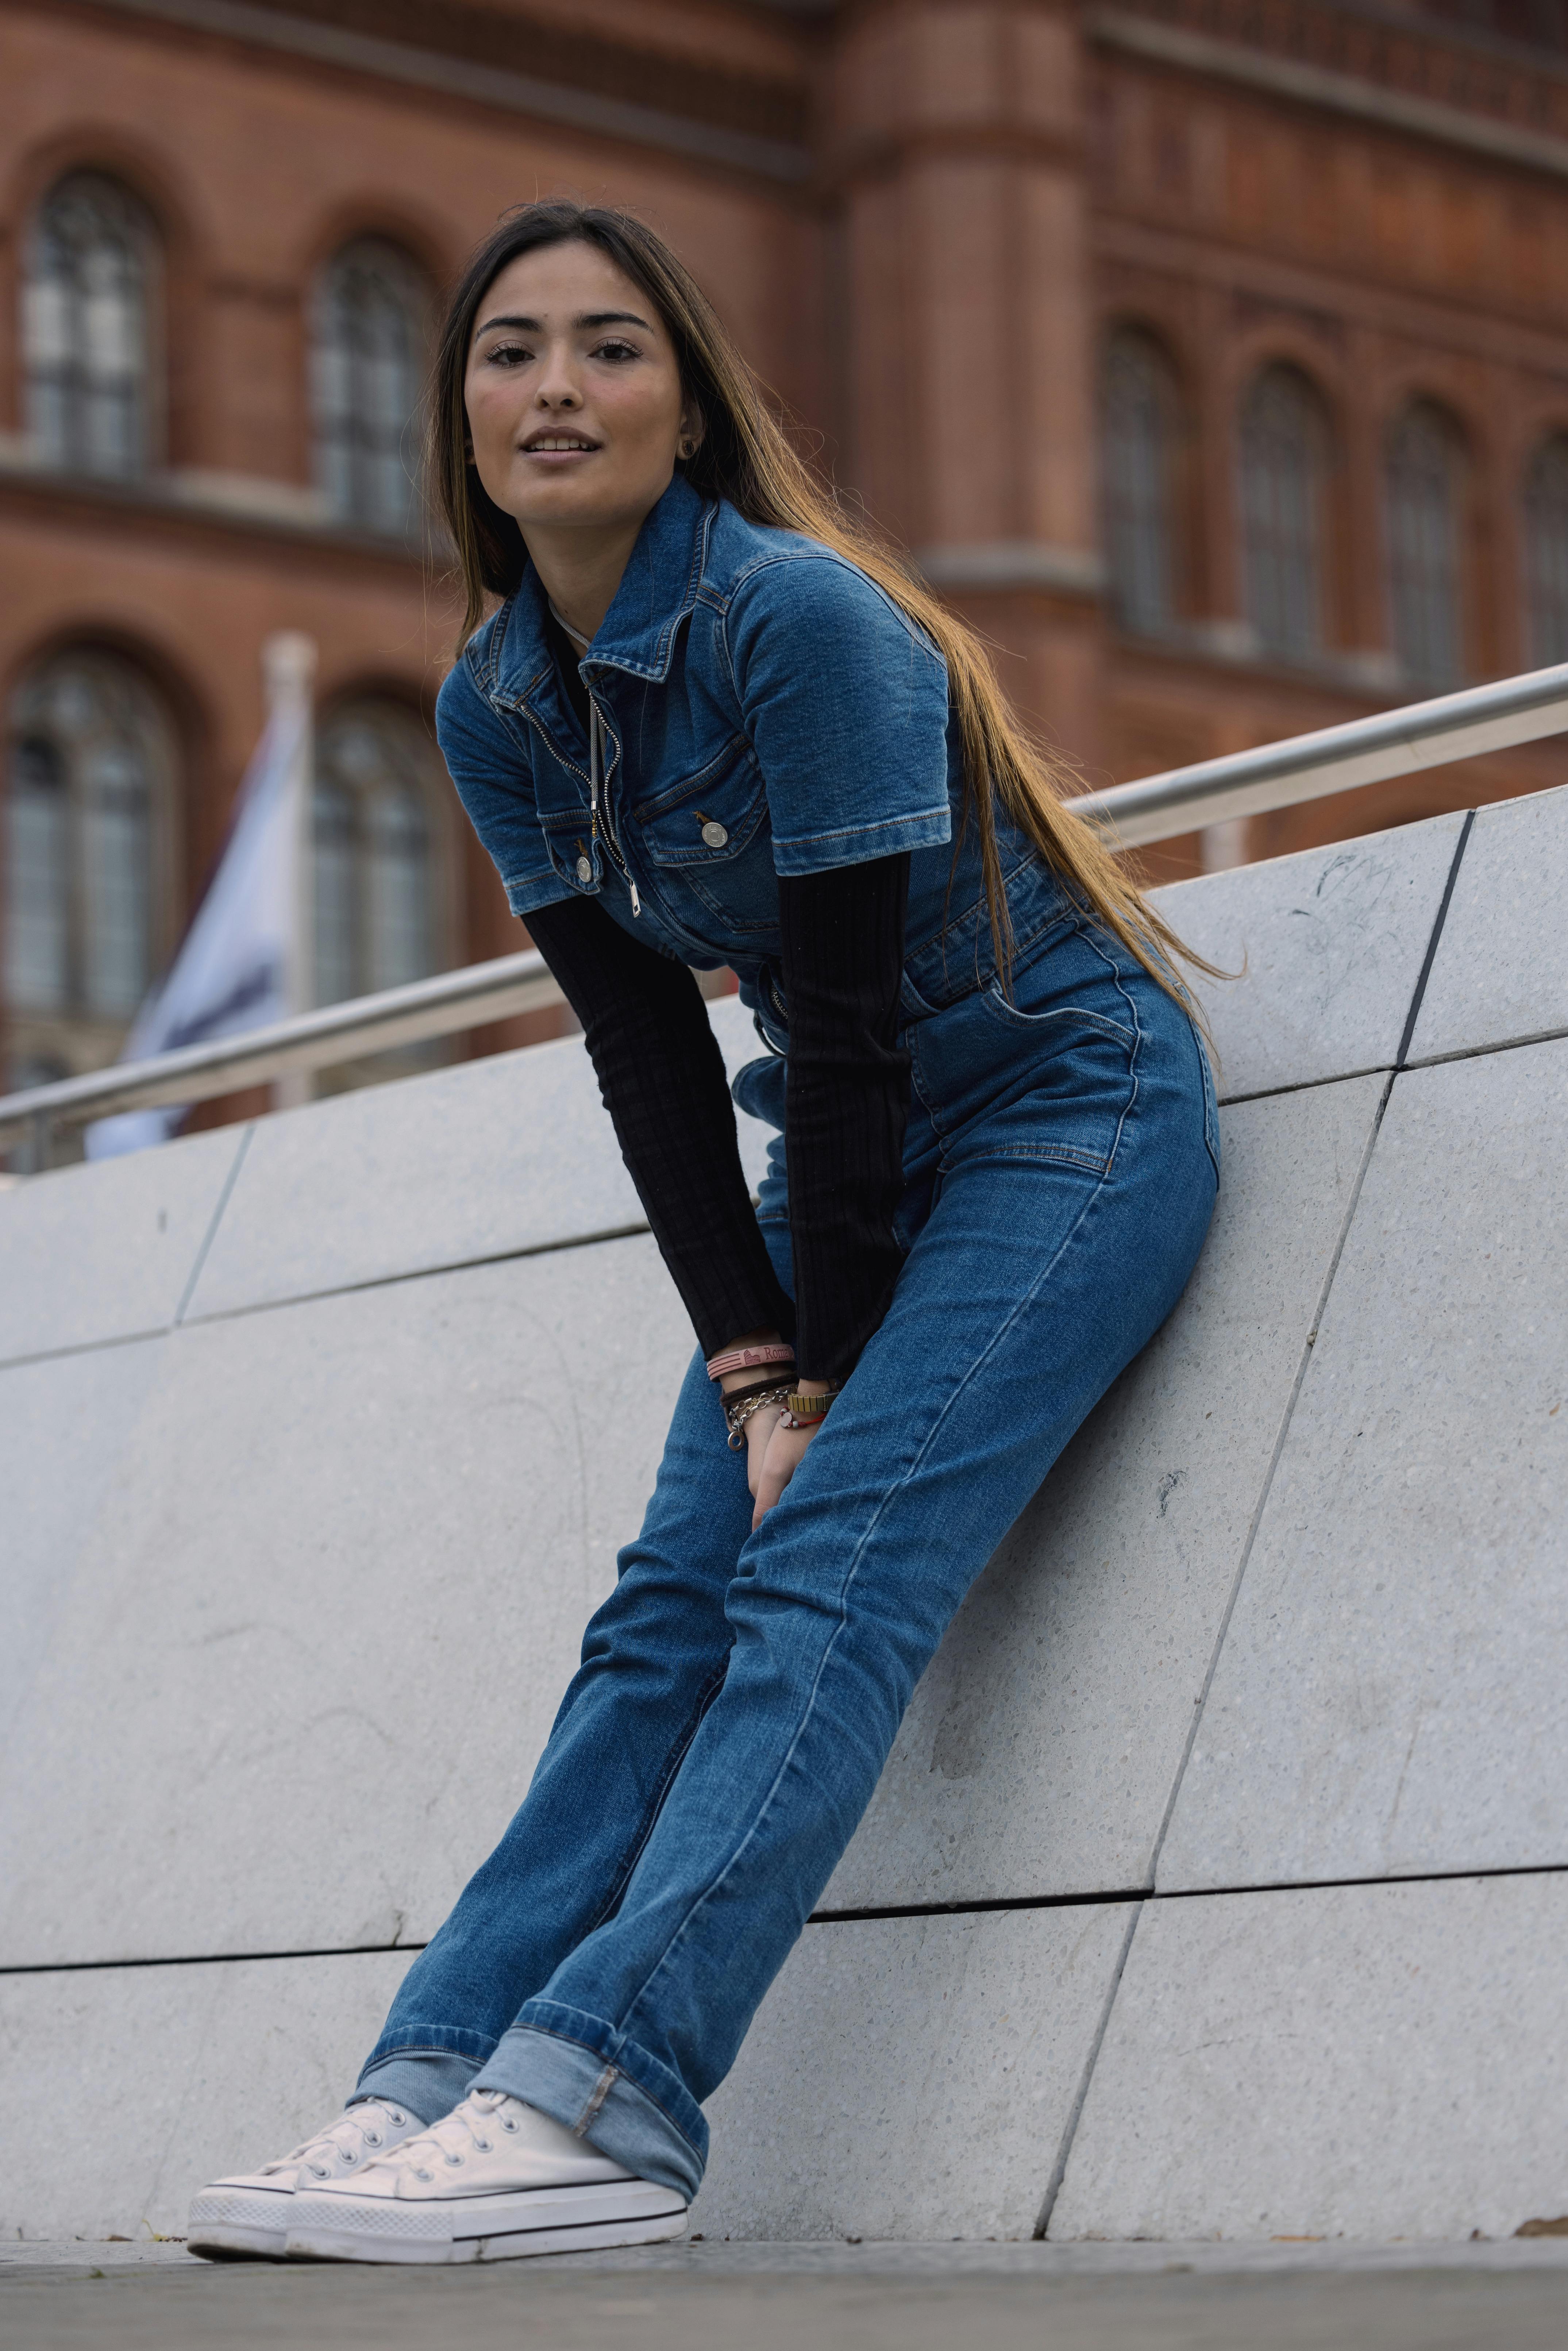 Aggregate 106+ denim dungarees style latest